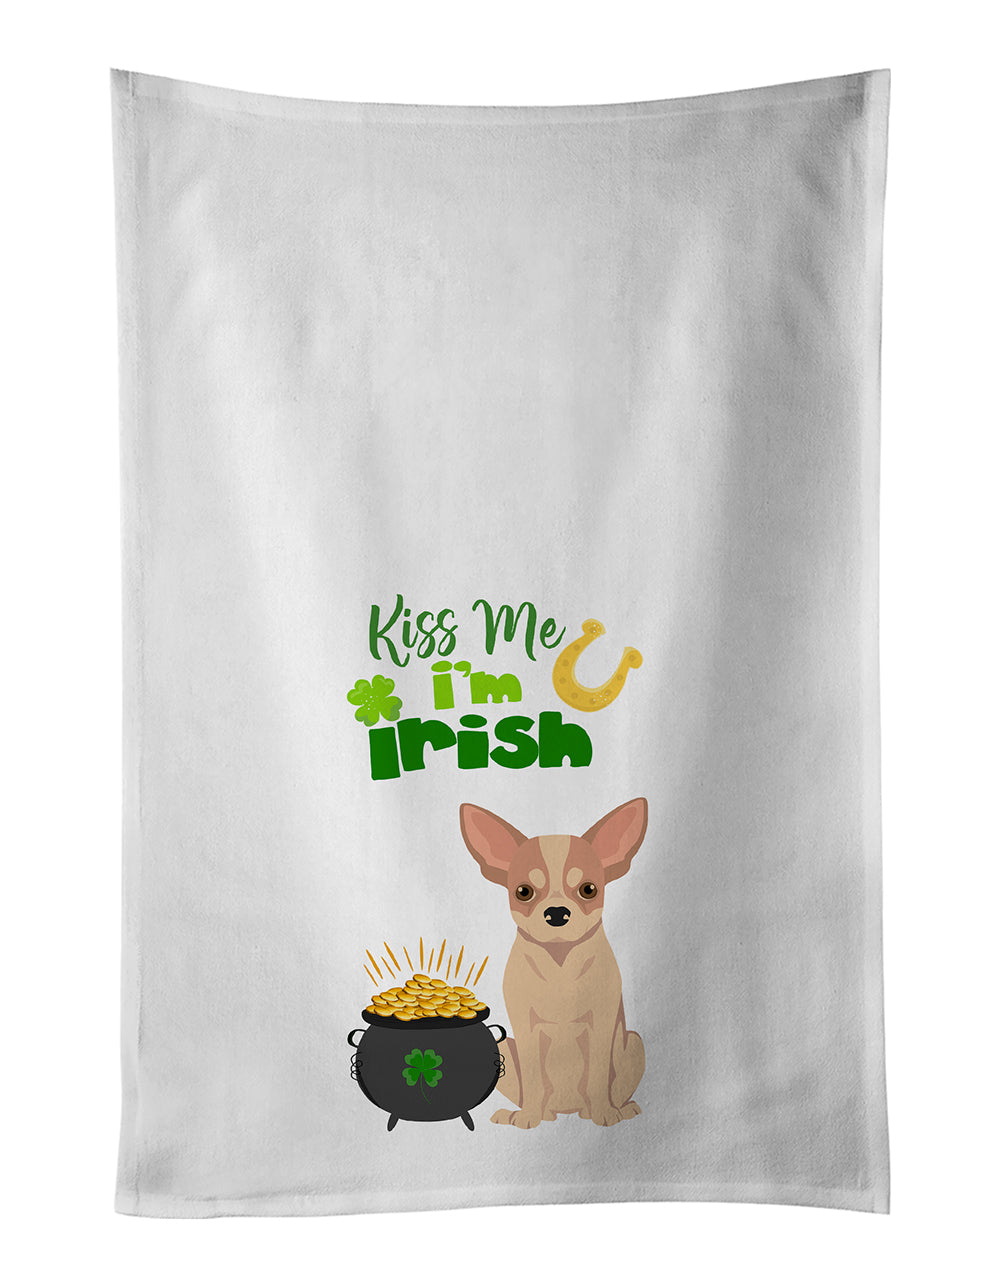 Buy this Fawn and White Chihuahua St. Patrick's Day White Kitchen Towel Set of 2 Dish Towels